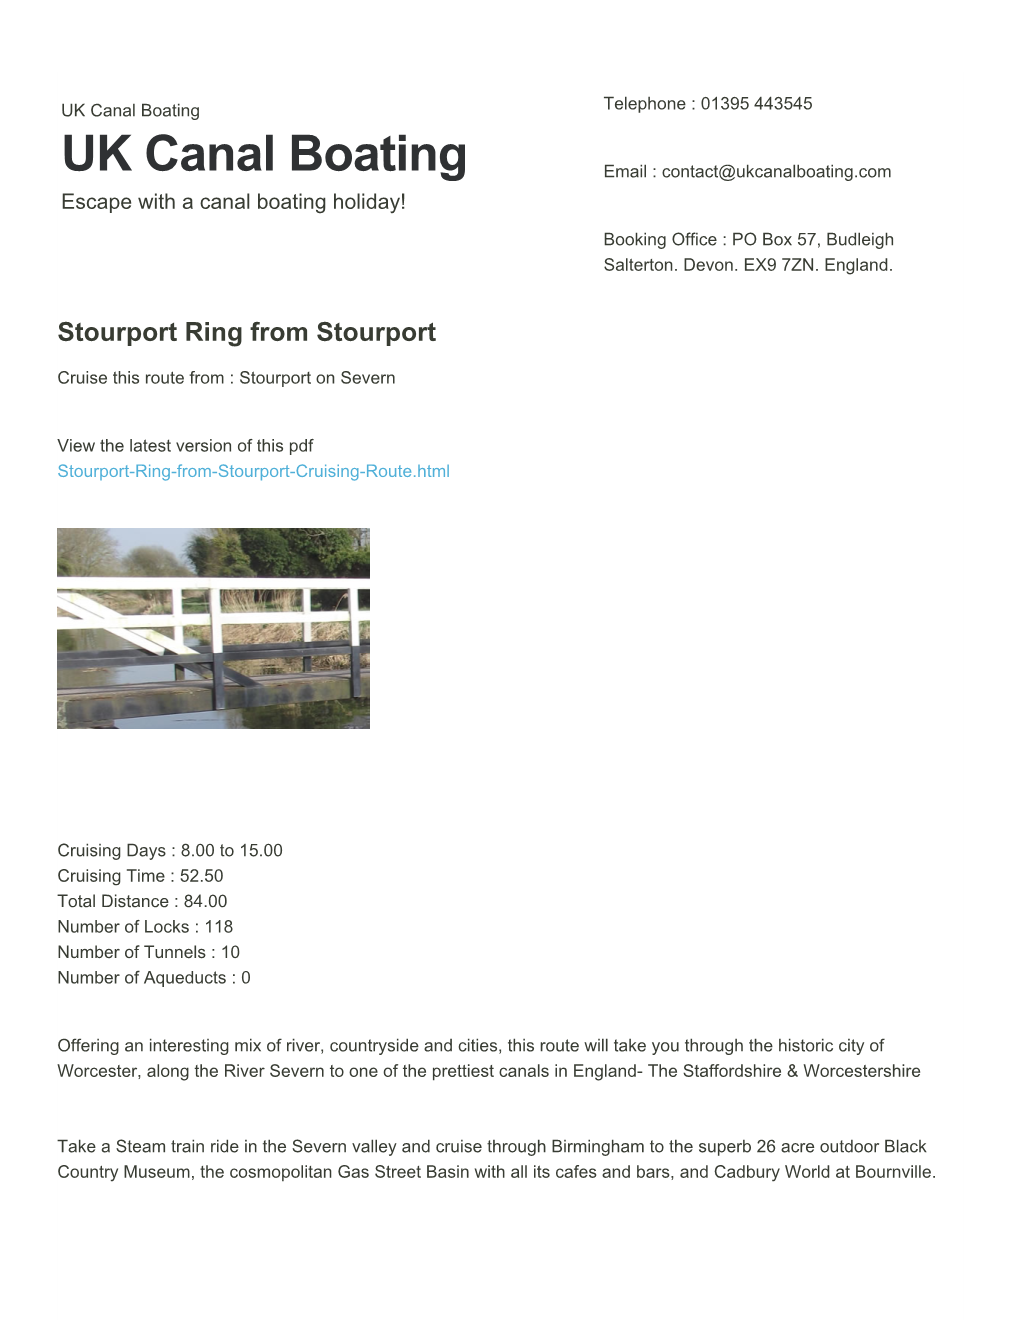 Stourport Ring from Stourport | UK Canal Boating